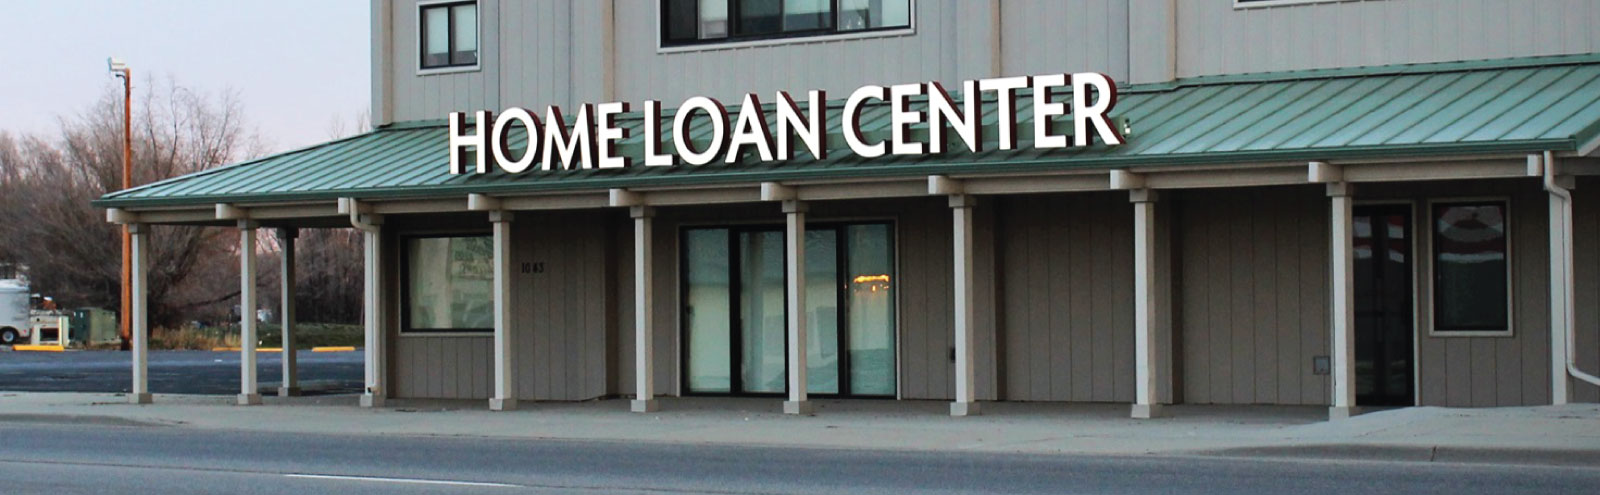 Exterior of the Home Loan Center building in Sheridan.